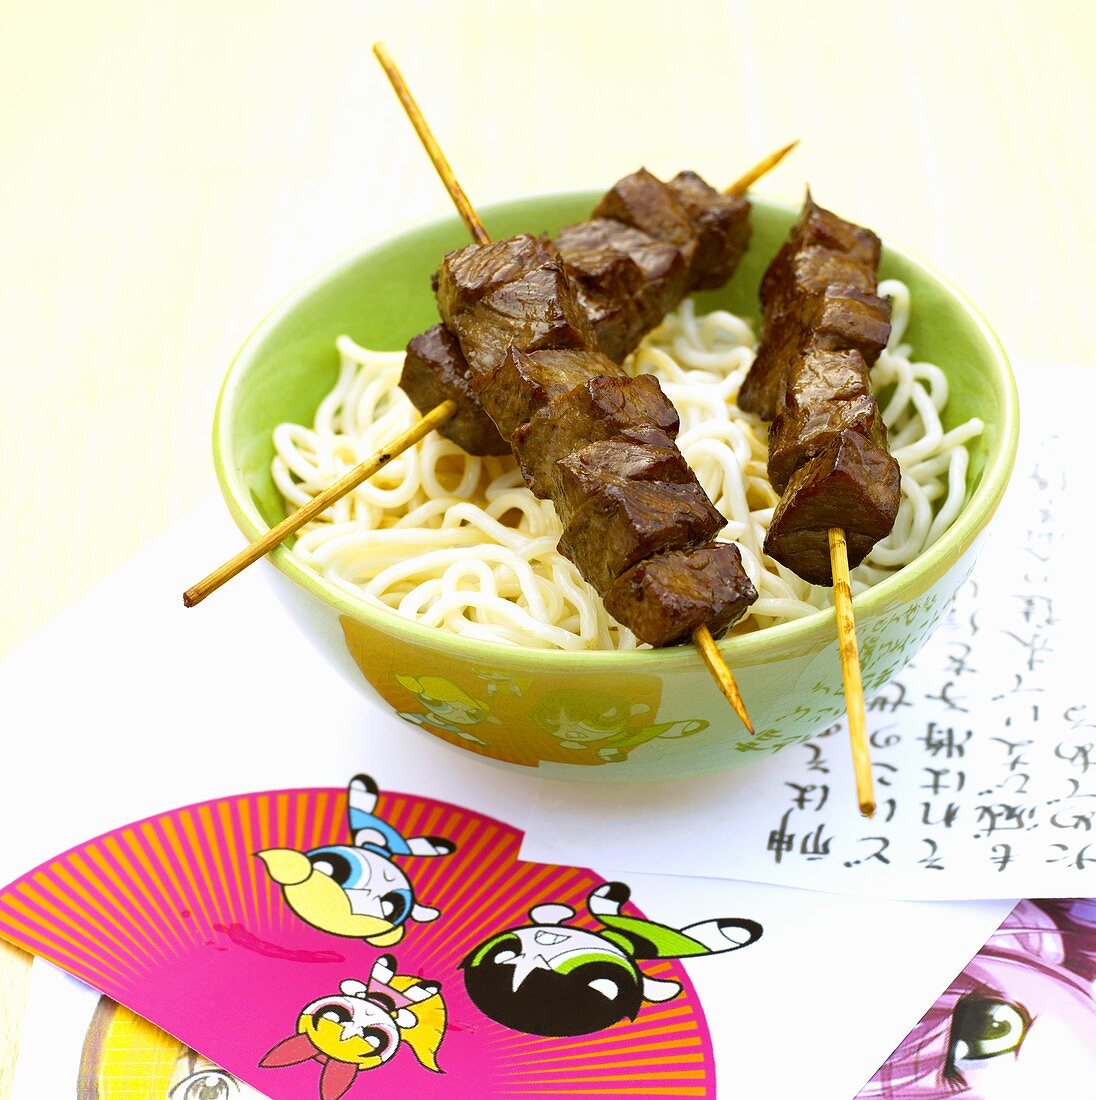 Noodles with meat skewers